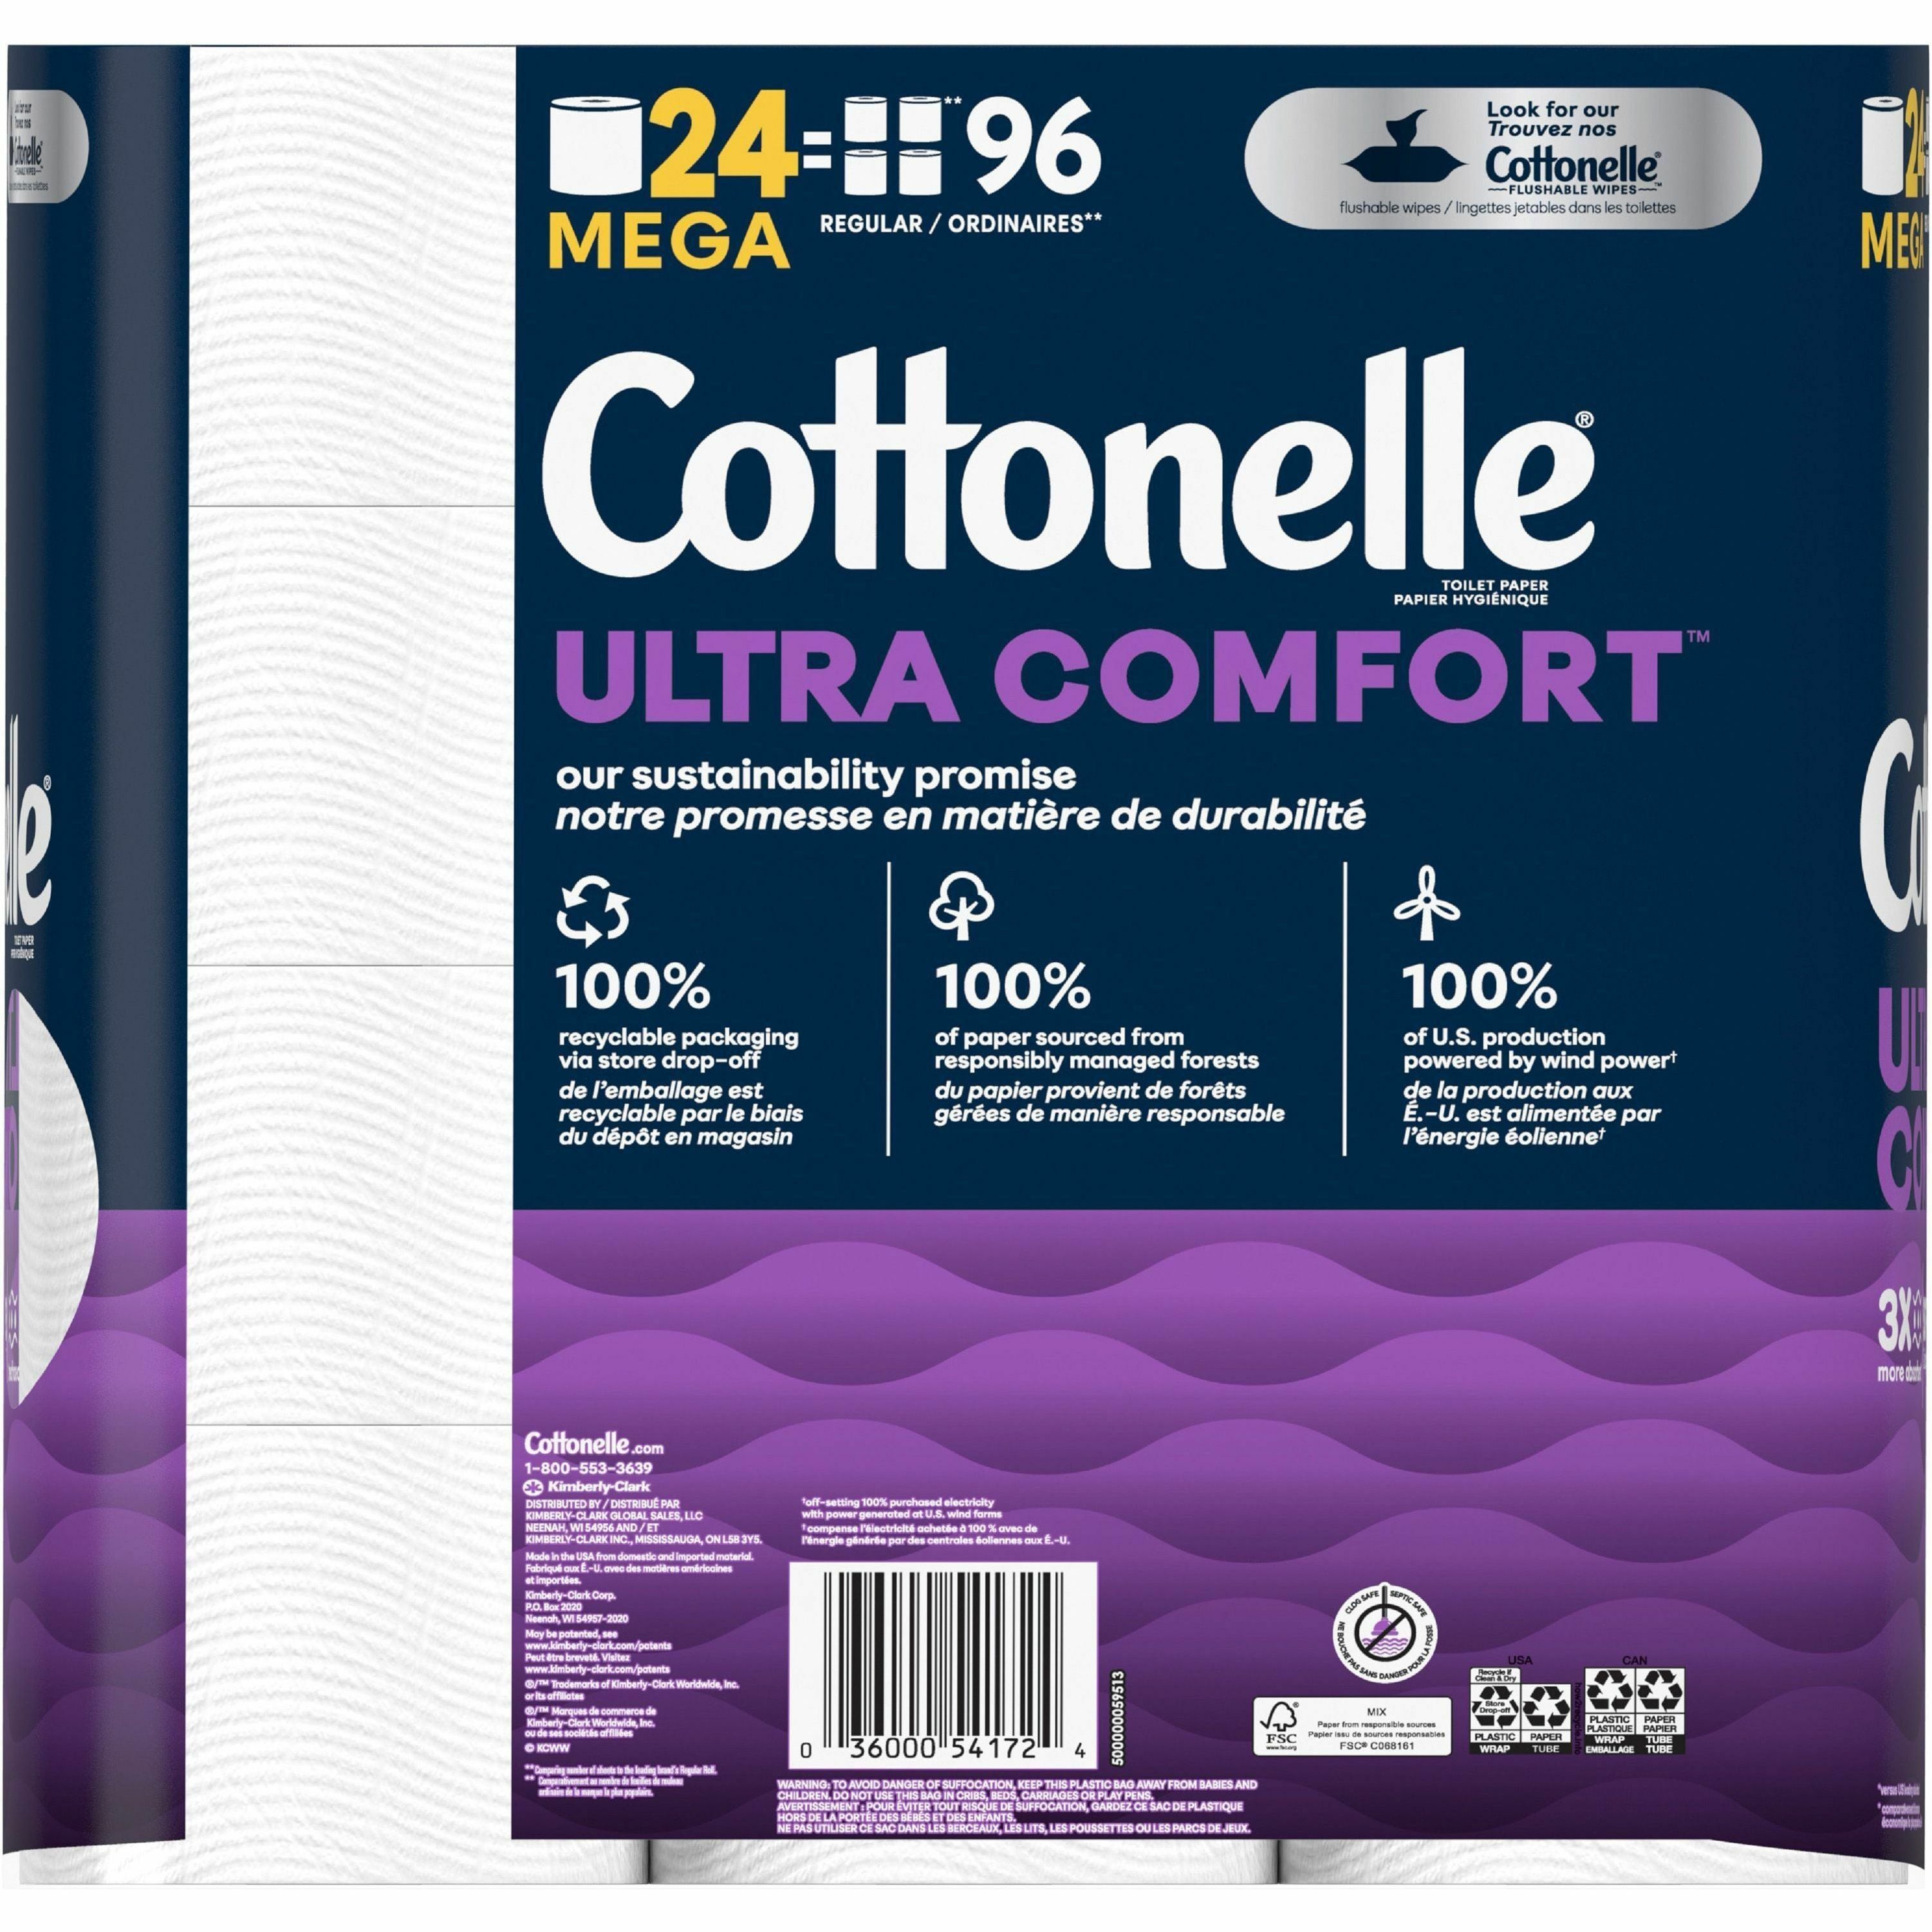 cottonelle-ultra-comfort-toilet-paper-2-ply-268-sheets-roll-white-fiber-moisture-absorbent-septic-safe-sewer-safe-chemical-free-dye-free-flushable-clog-safe-thick-paraben-free-fragrance-free-for-toilet-24-pack_kcc54174 - 2